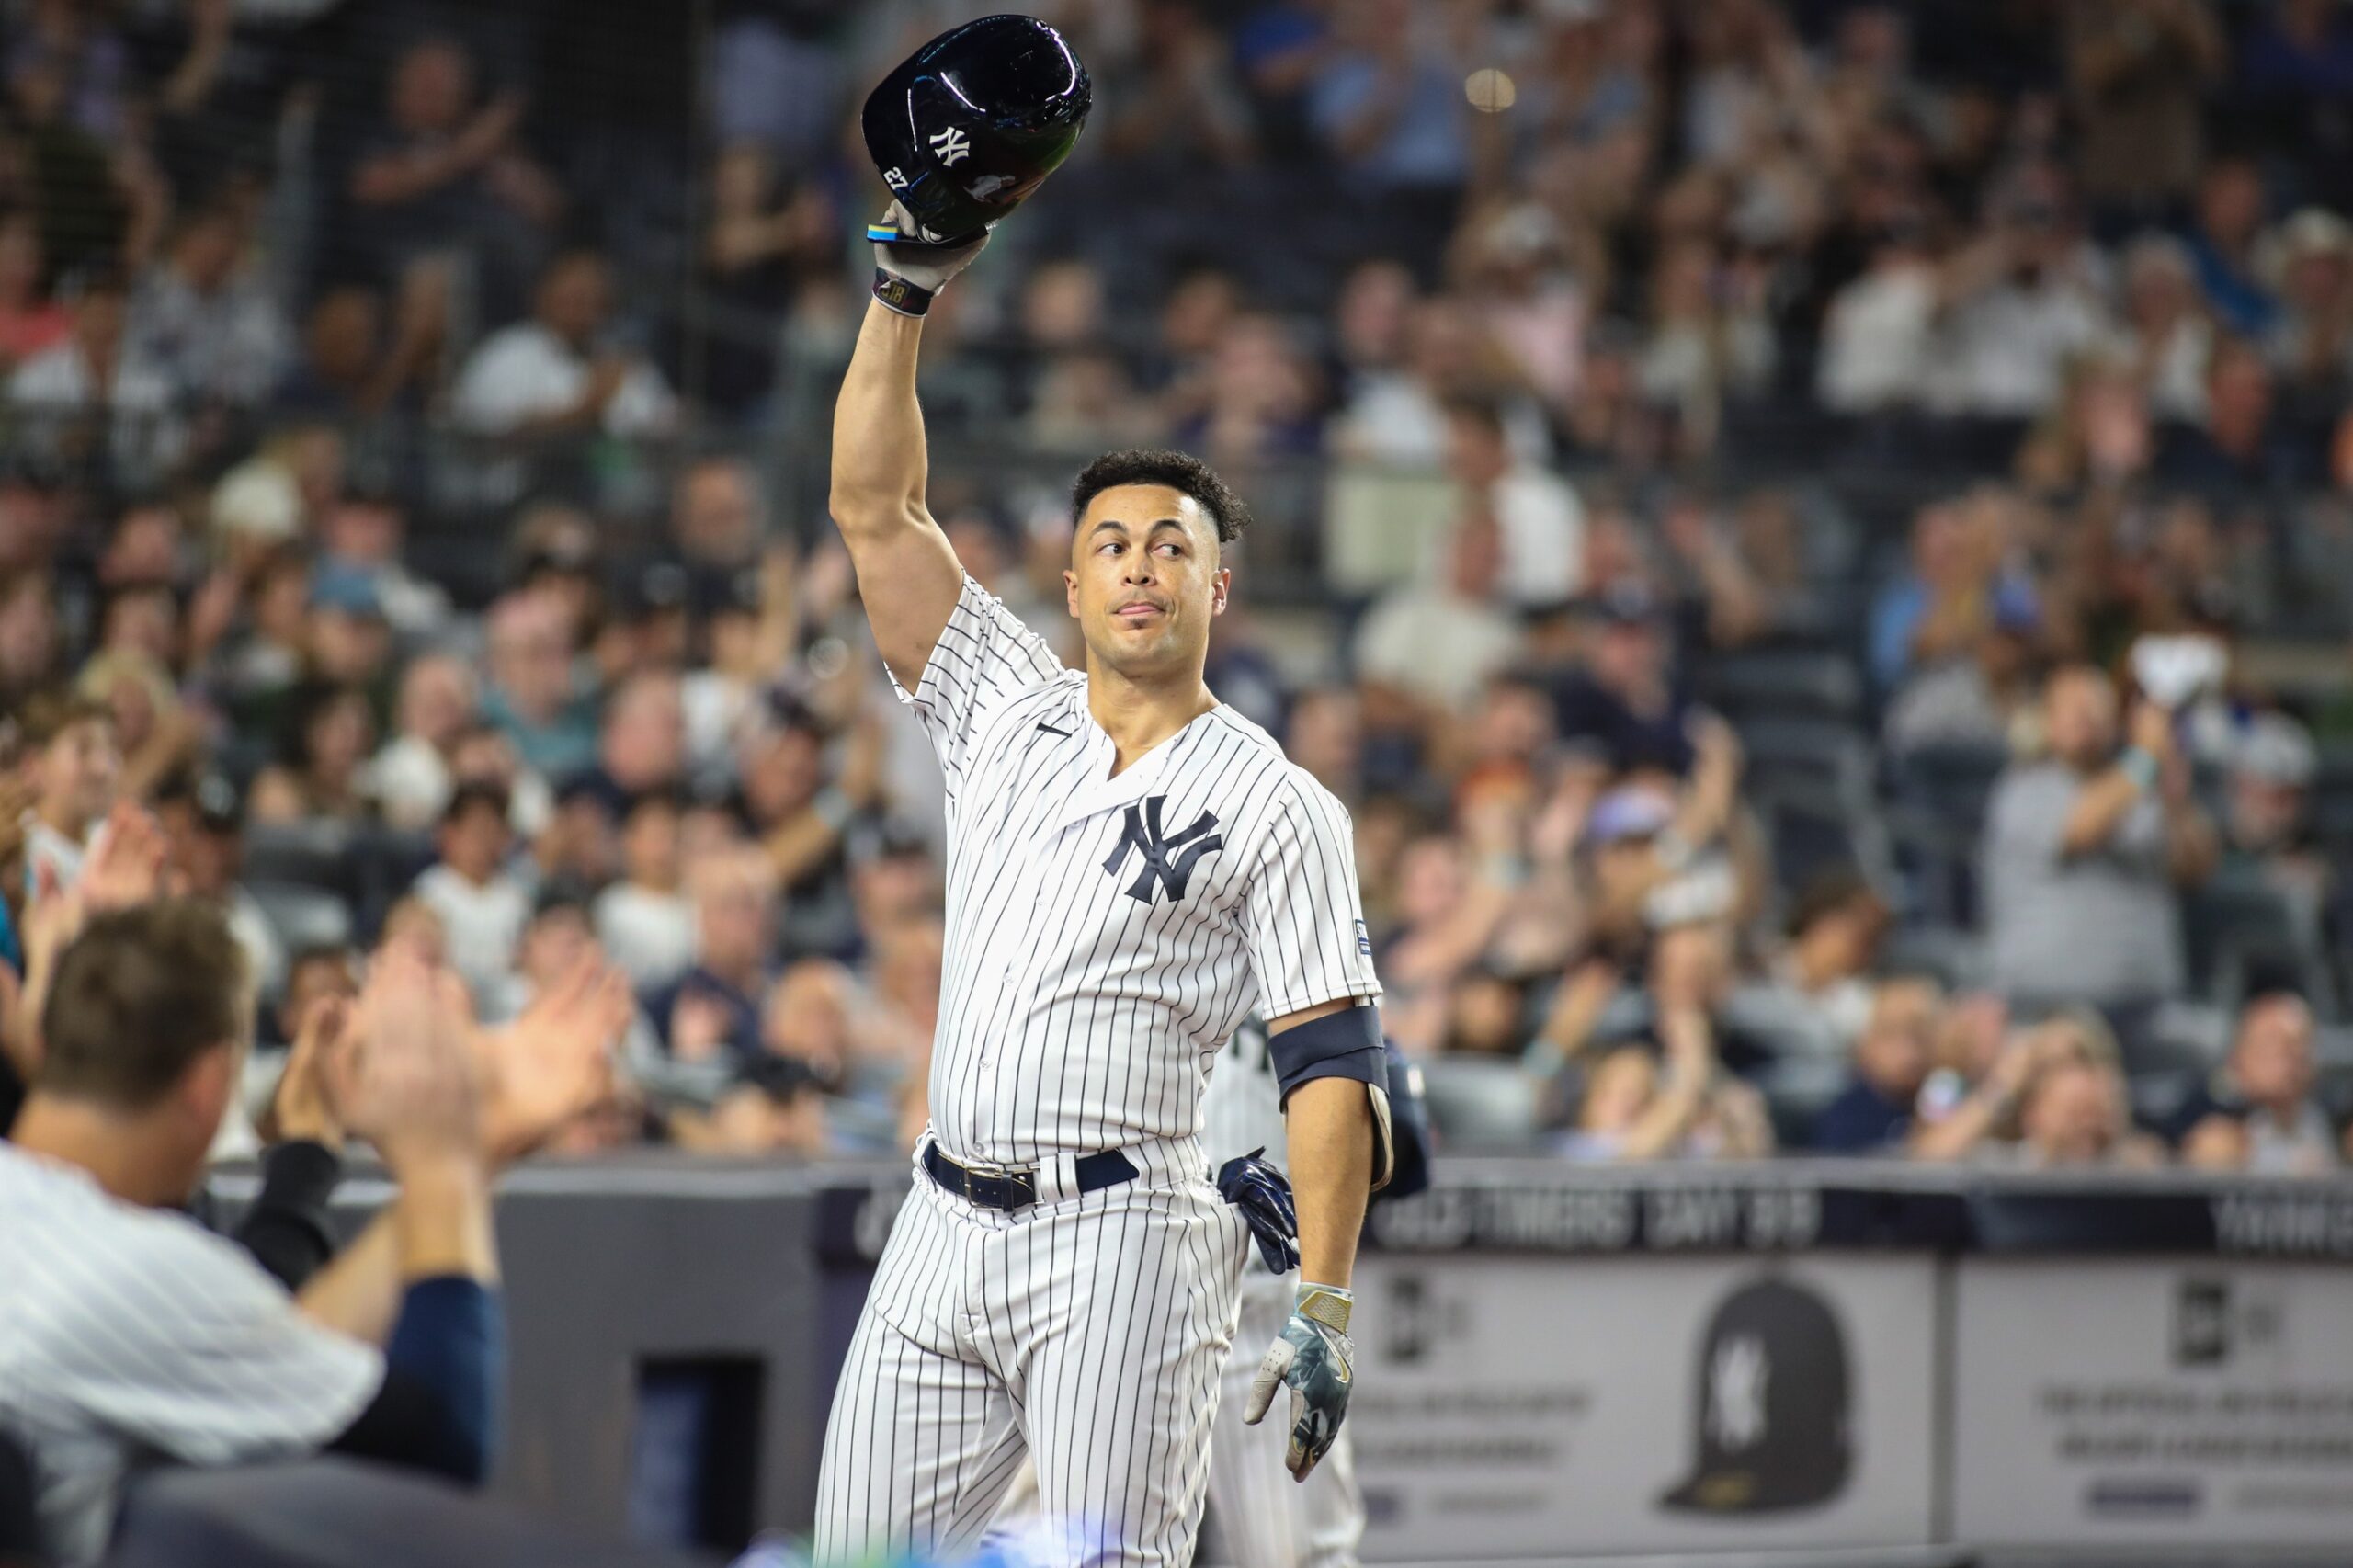 Trade to Yankees will cost Giancarlo Stanton millions